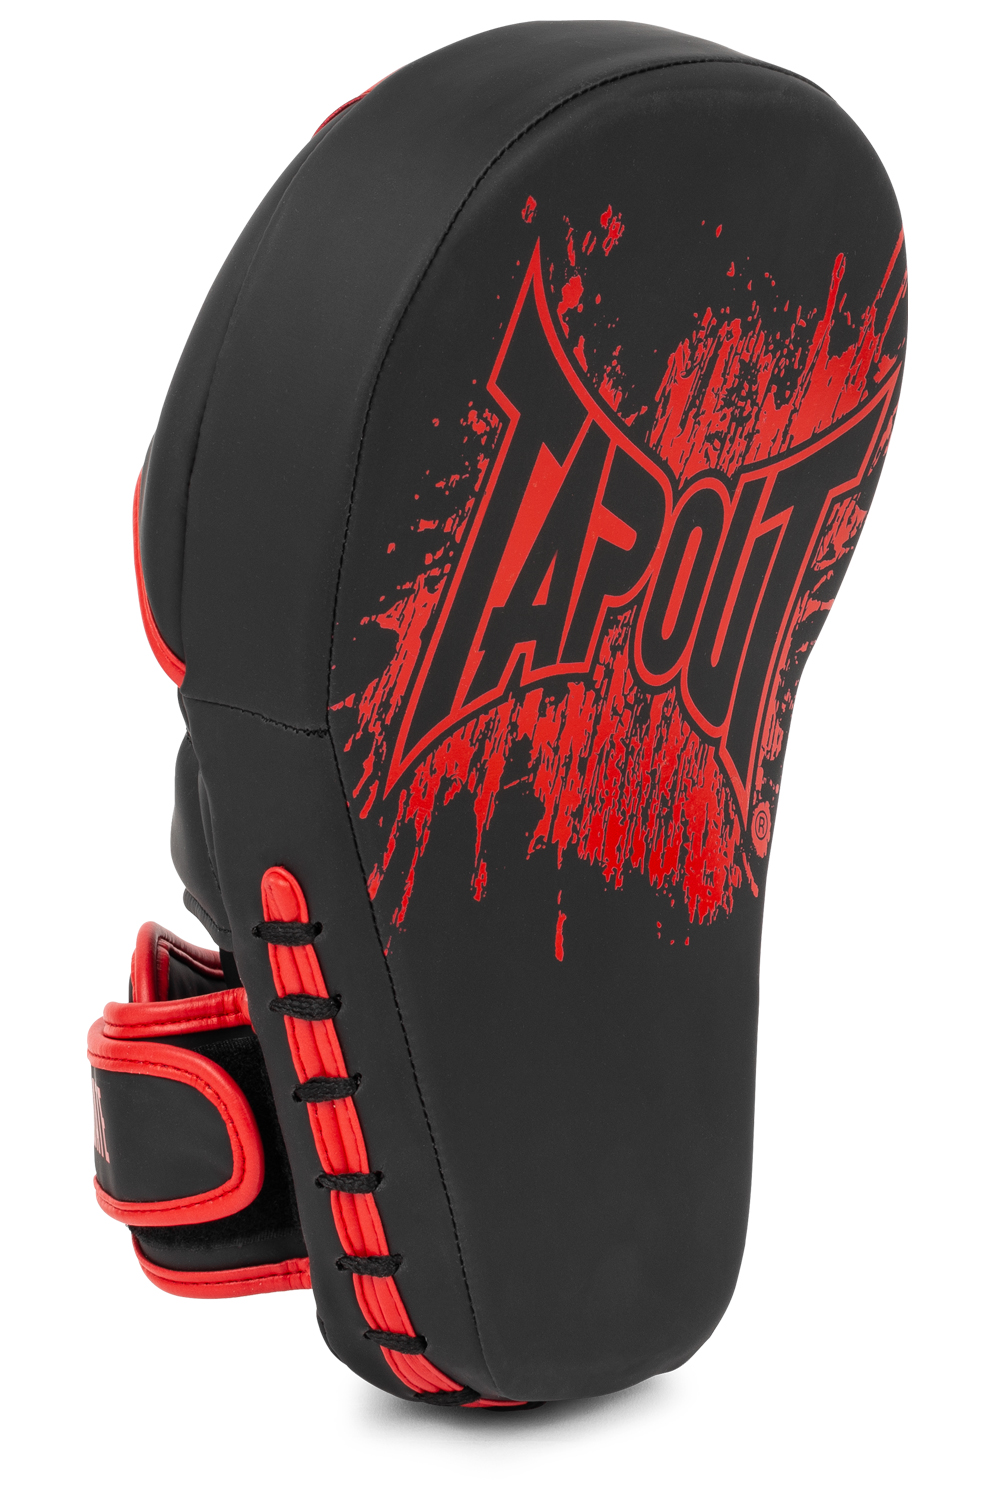 Tapout Artificial Leather Hook & Jab Pads (1 Pair)